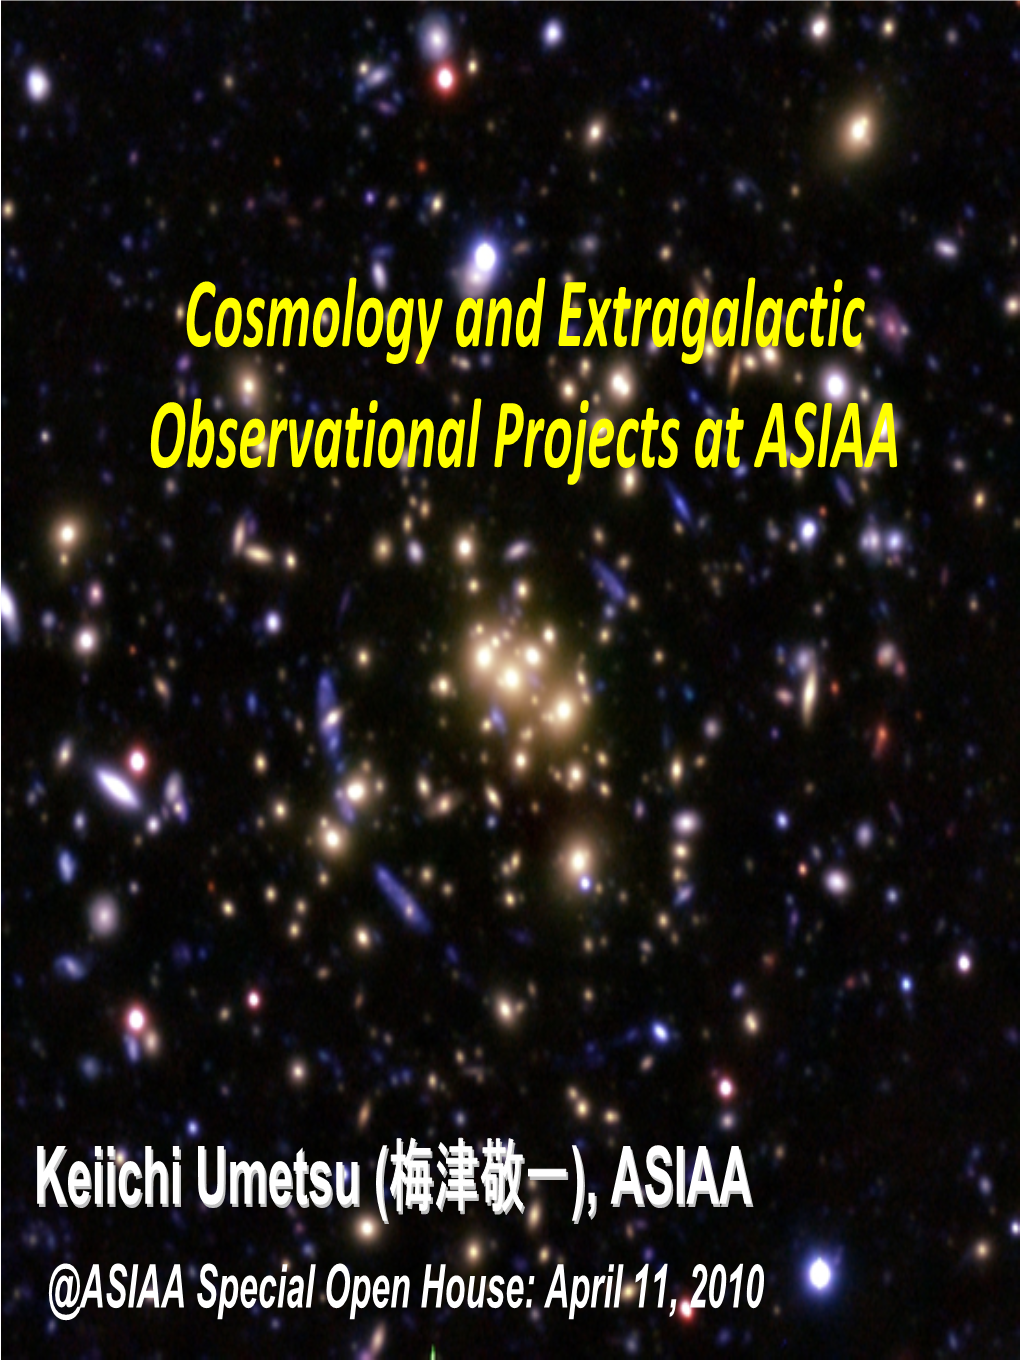 Cosmology and Extragalactic Observational Projects at ASIAA